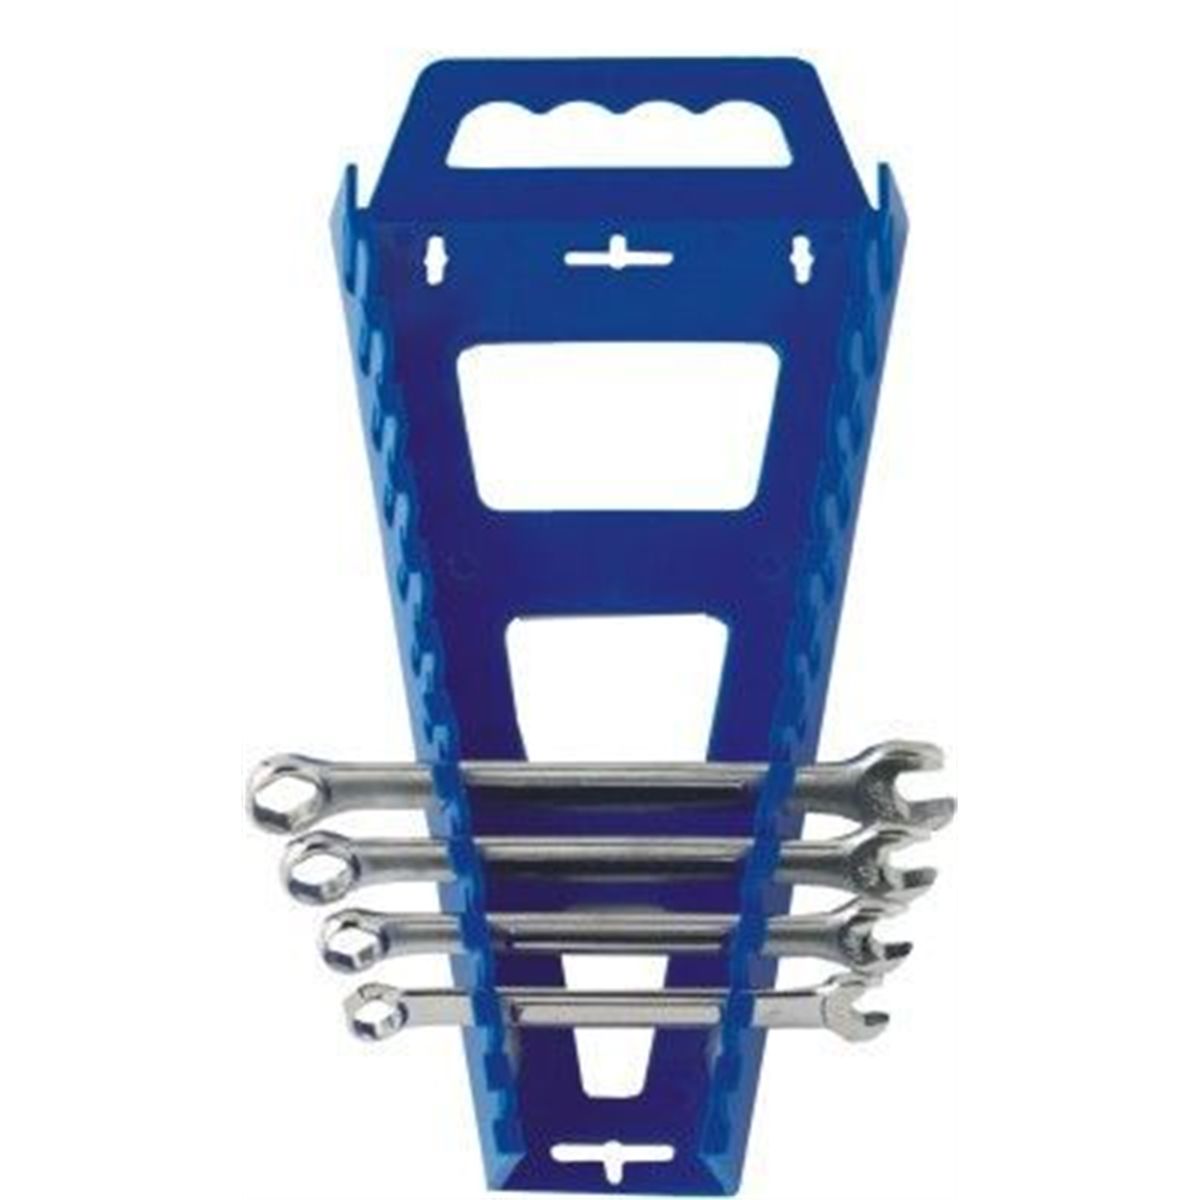 Plier rack, Plyworx PliersRack II, plastic, 12 x 7 x 2-3/4 inches with 16  slots. Sold individually. - Fire Mountain Gems and Beads